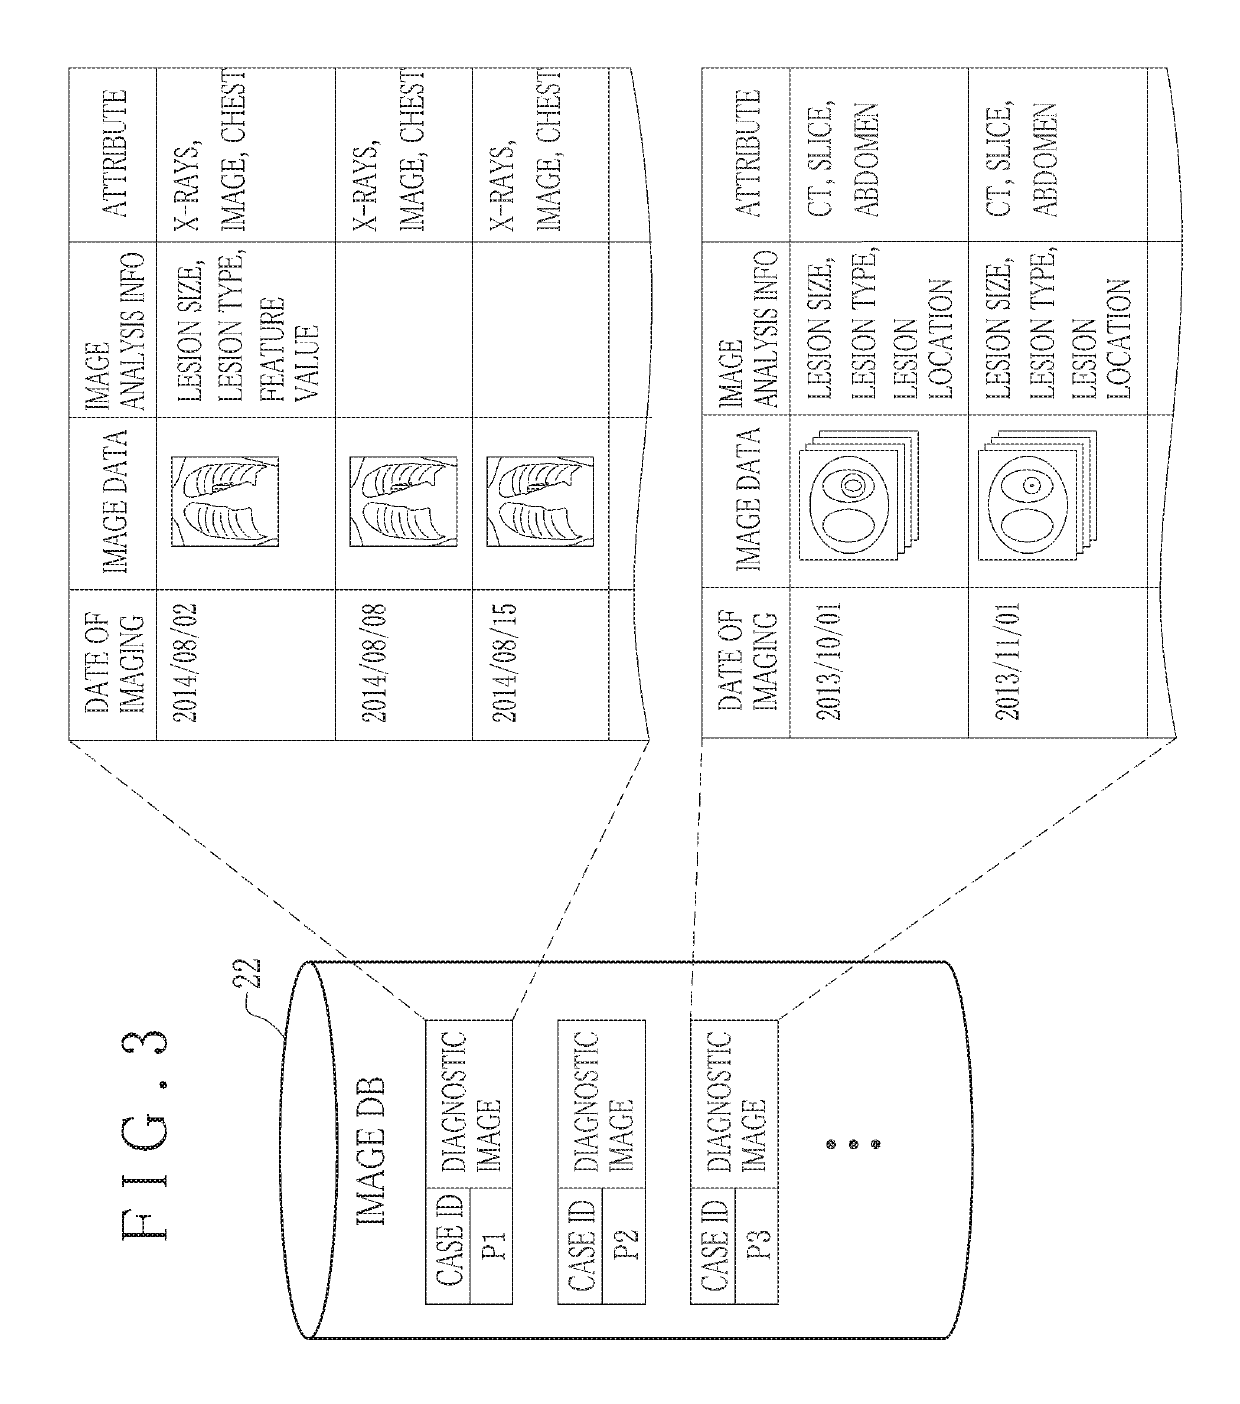 Information management apparatus and method for medical care data, and non-transitory computer readable medium